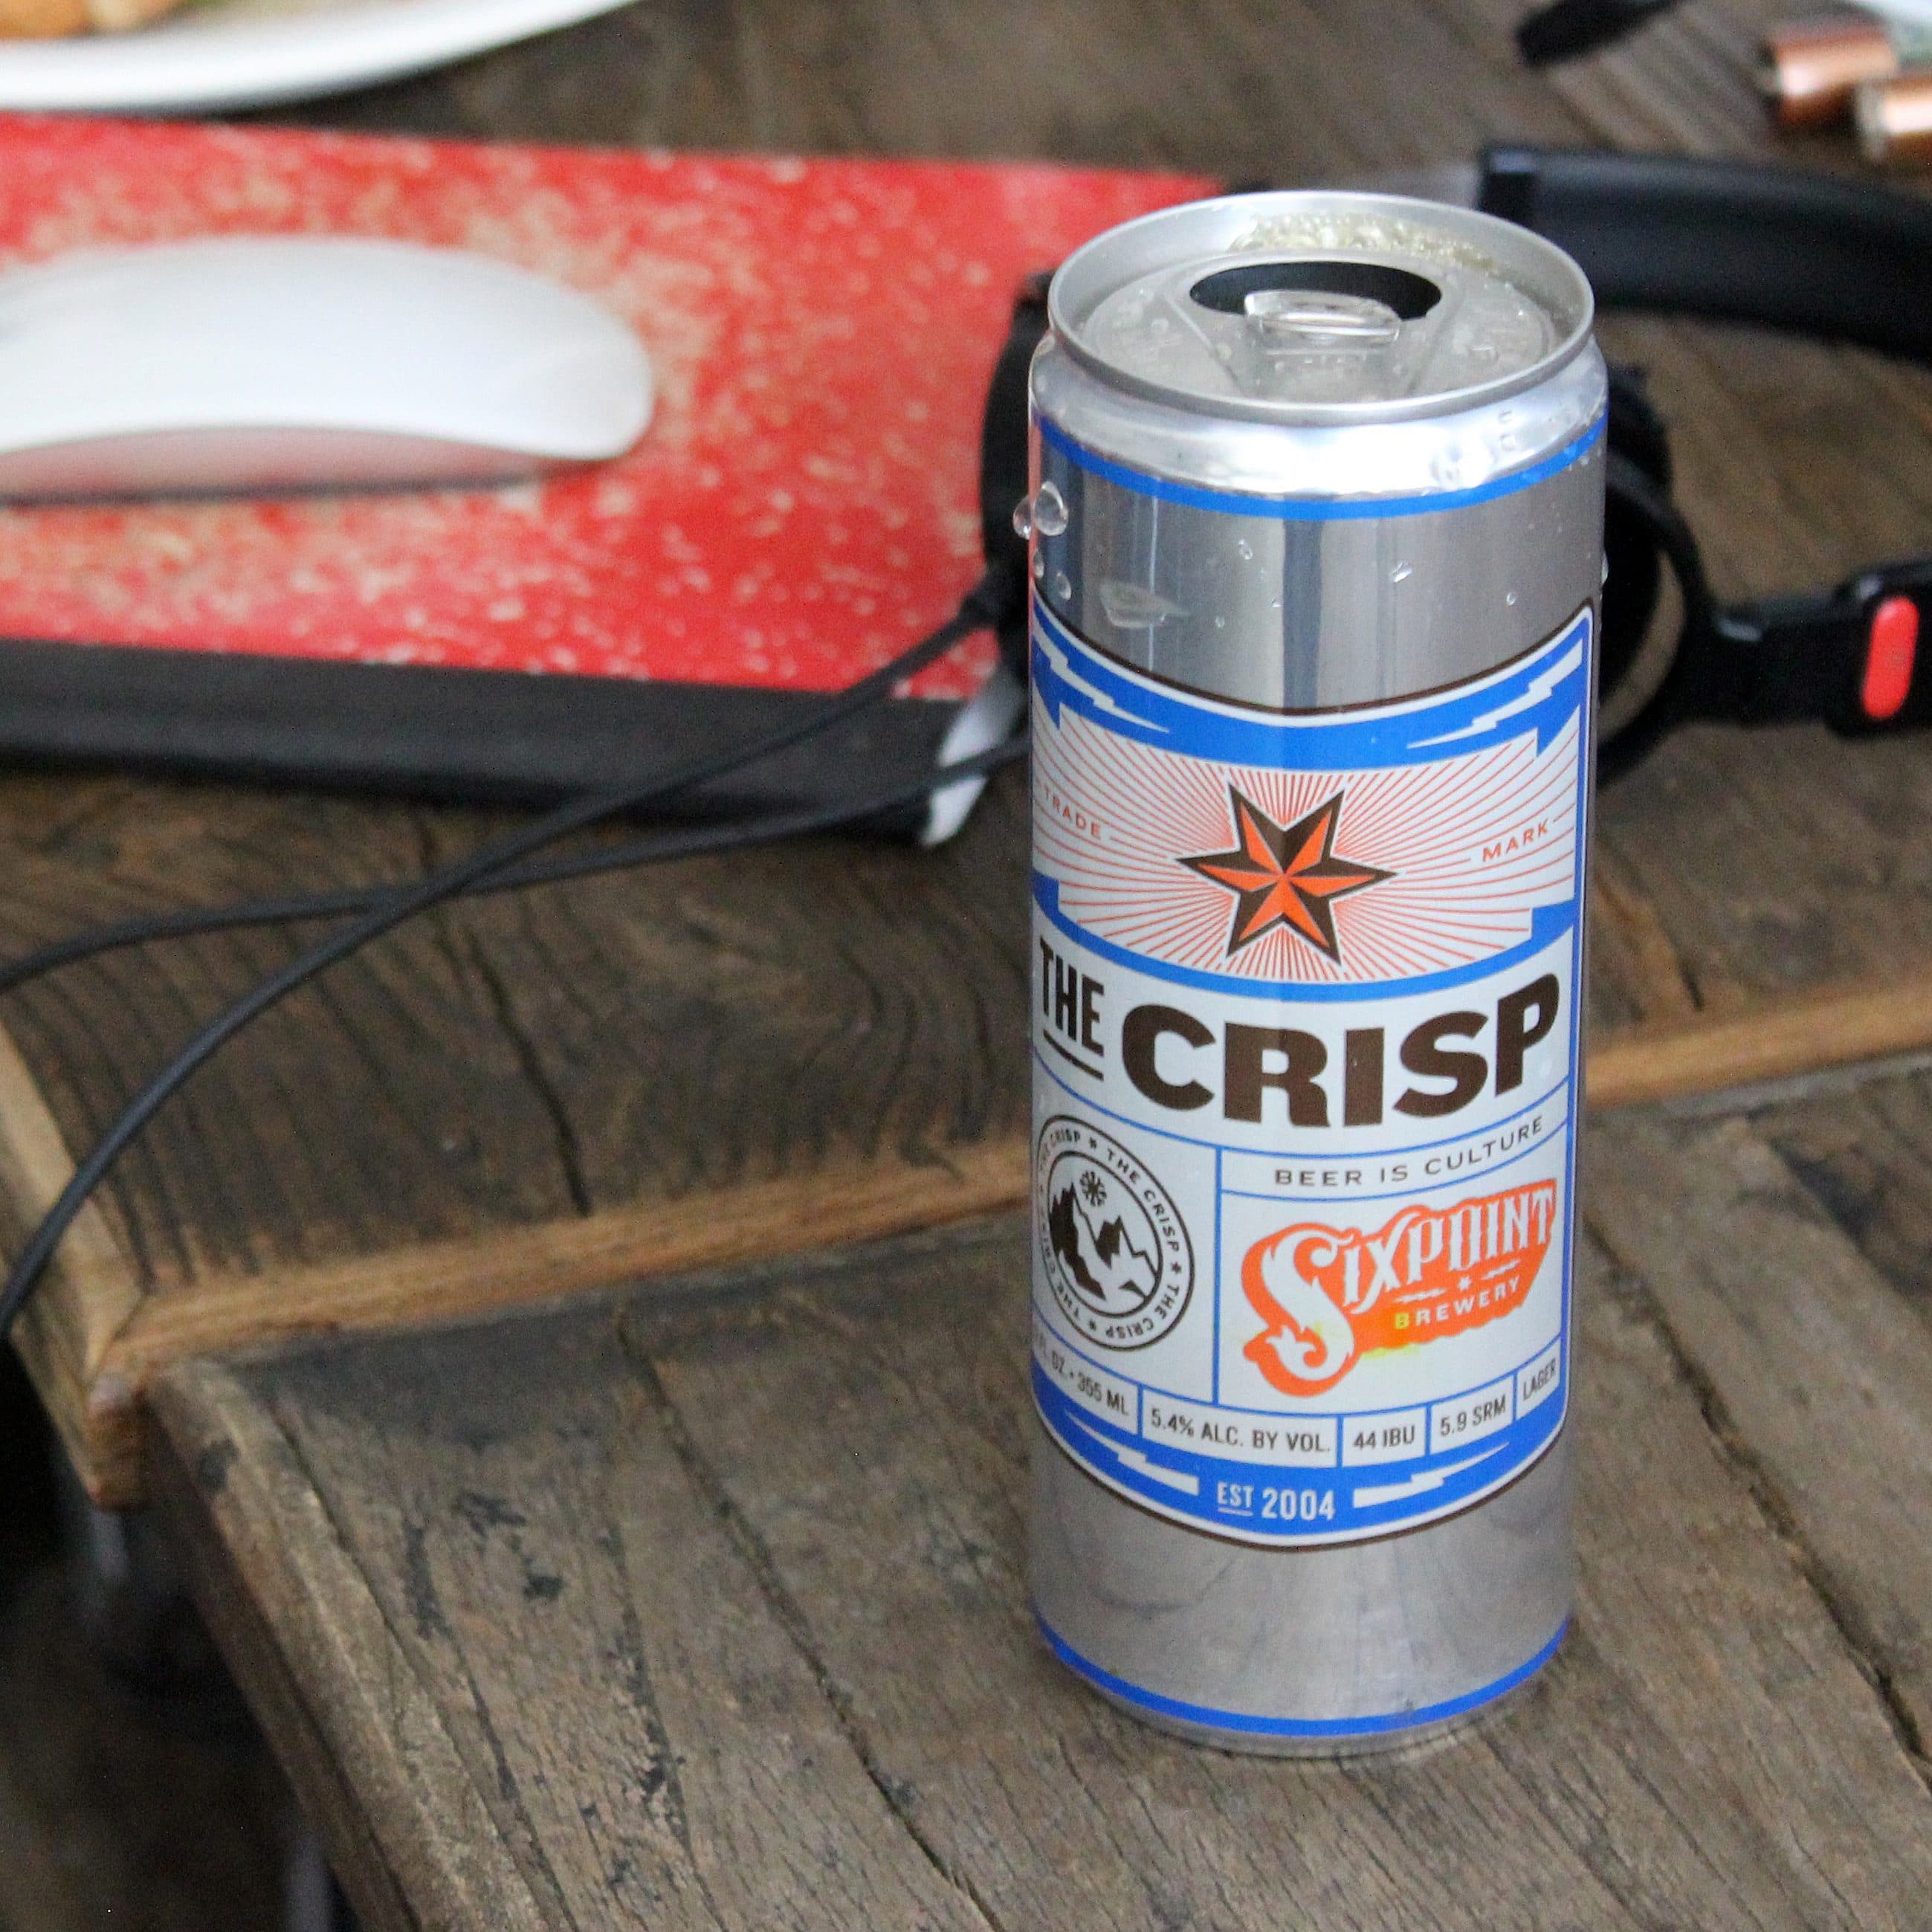 A can of Sixpoint "The Crisp" beer rests on a wooden table near a red notebook, white computer mouse, and a pair of black earbuds. The can features a blue and silver design with a star logo and the phrase "Beer is Culture.